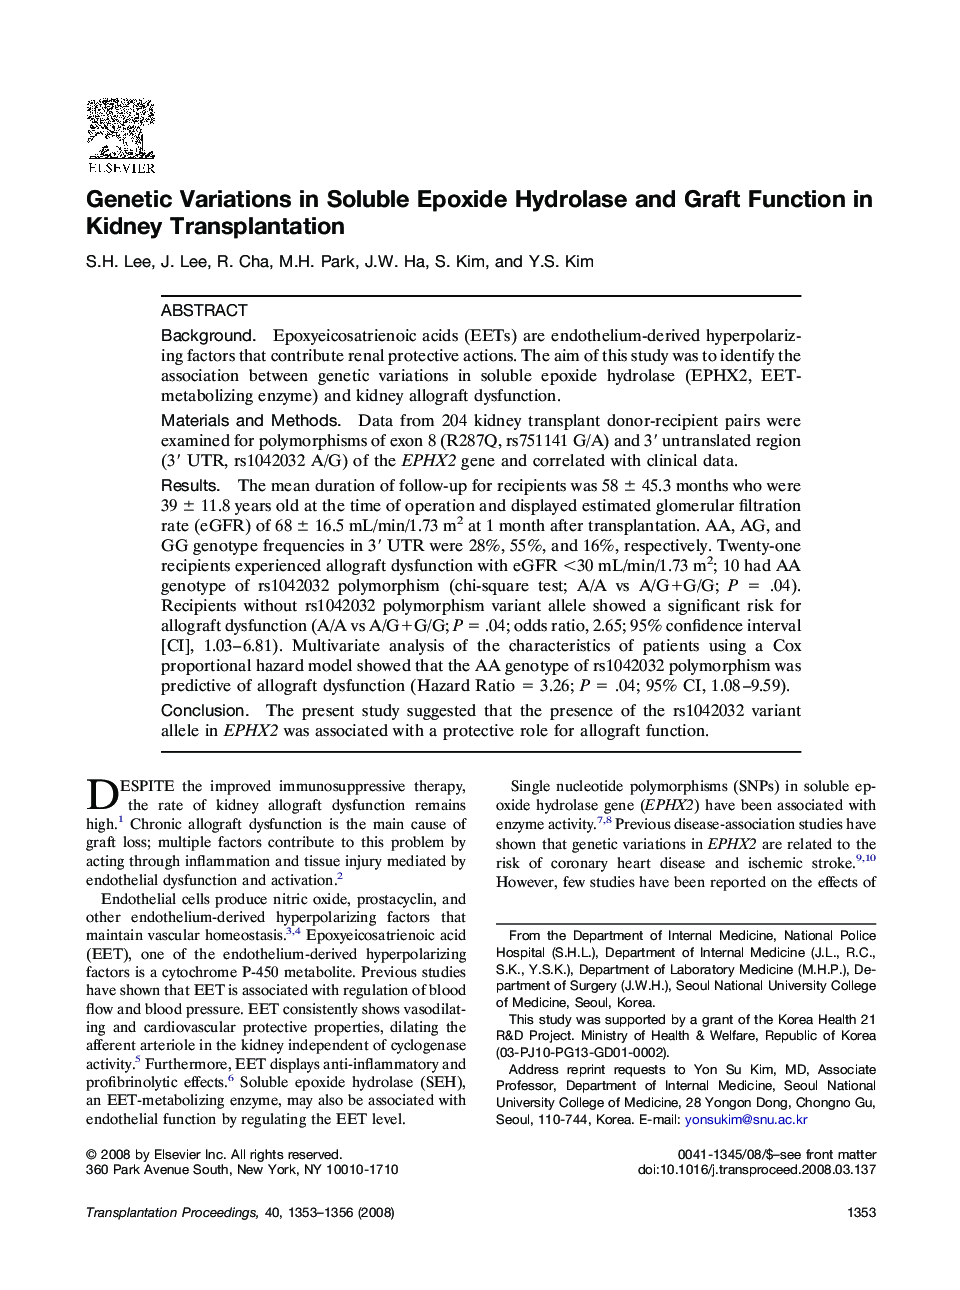 Genetic Variations in Soluble Epoxide Hydrolase and Graft Function in Kidney Transplantation 